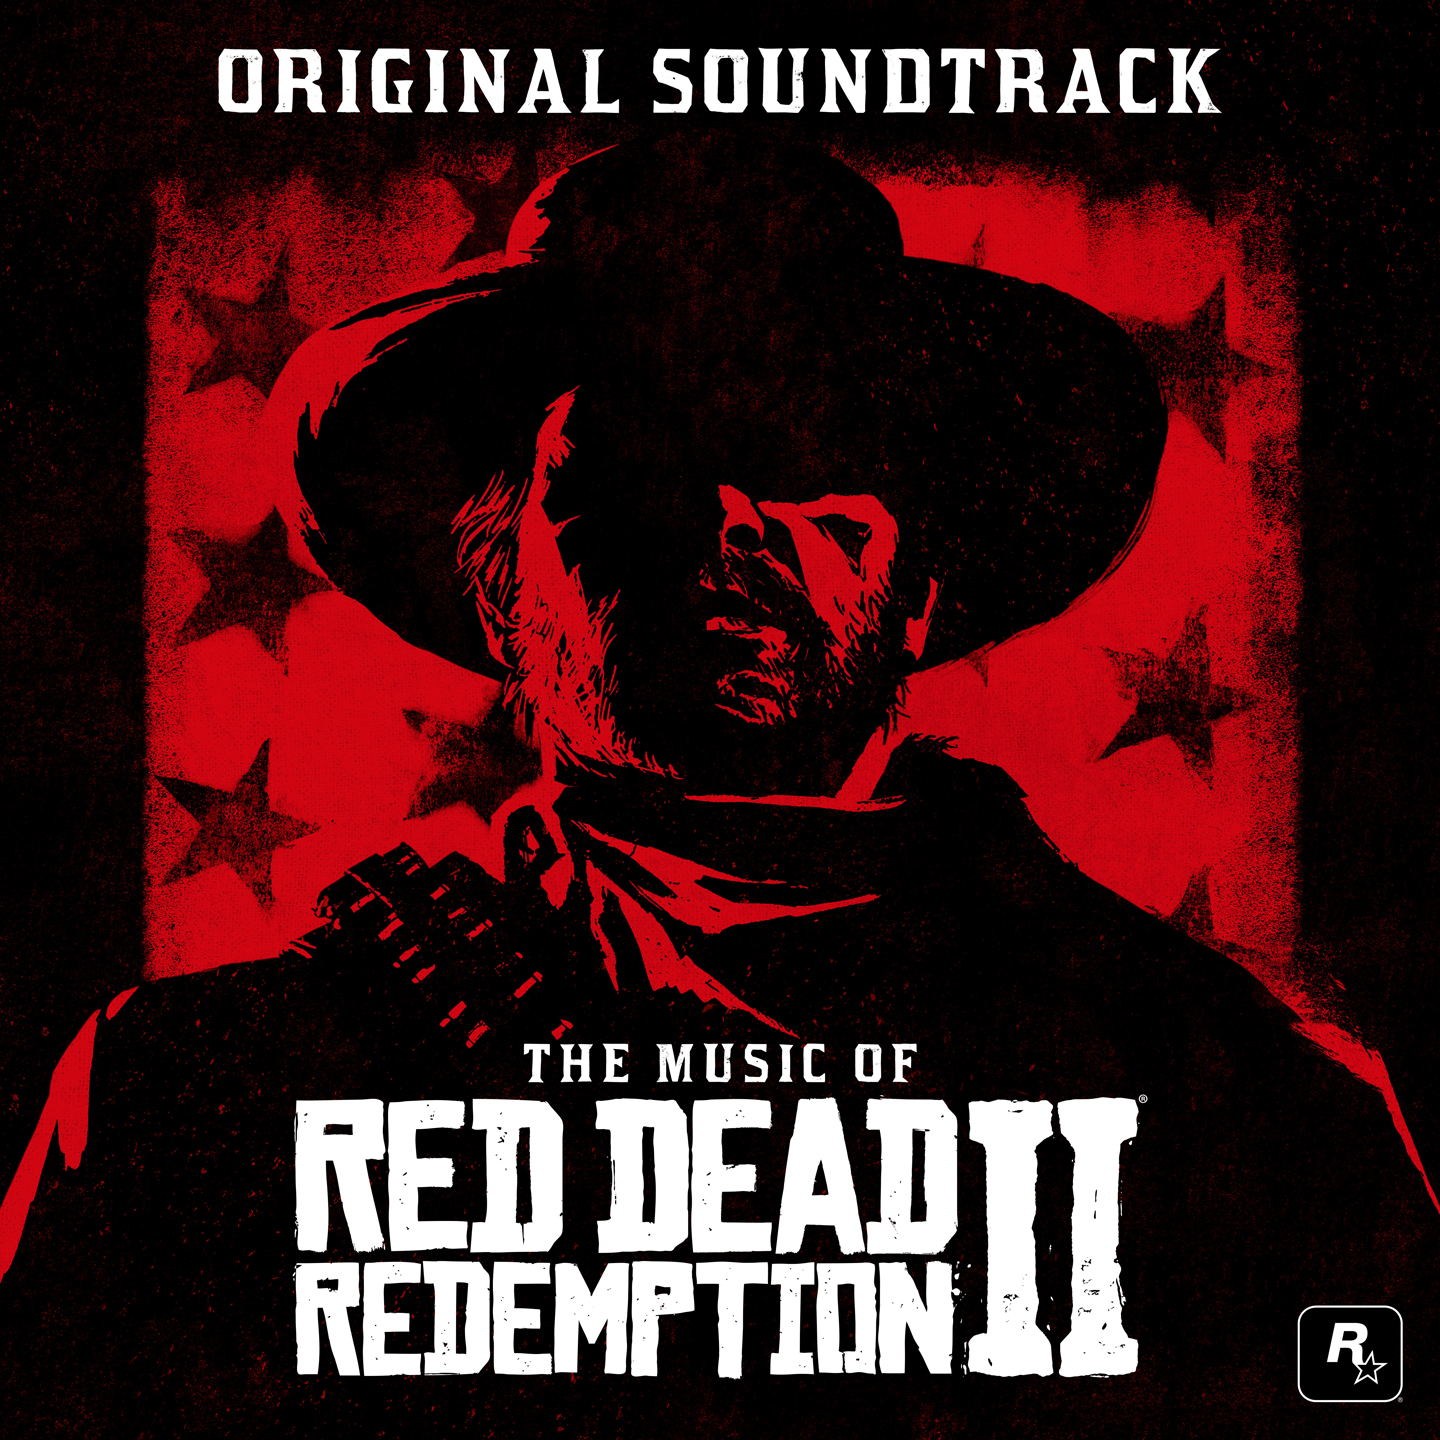 The Music Of Red Dead Redemption 2 Original Soundtrack Available July 12 Rockstar Games - roblox id number for rockstar